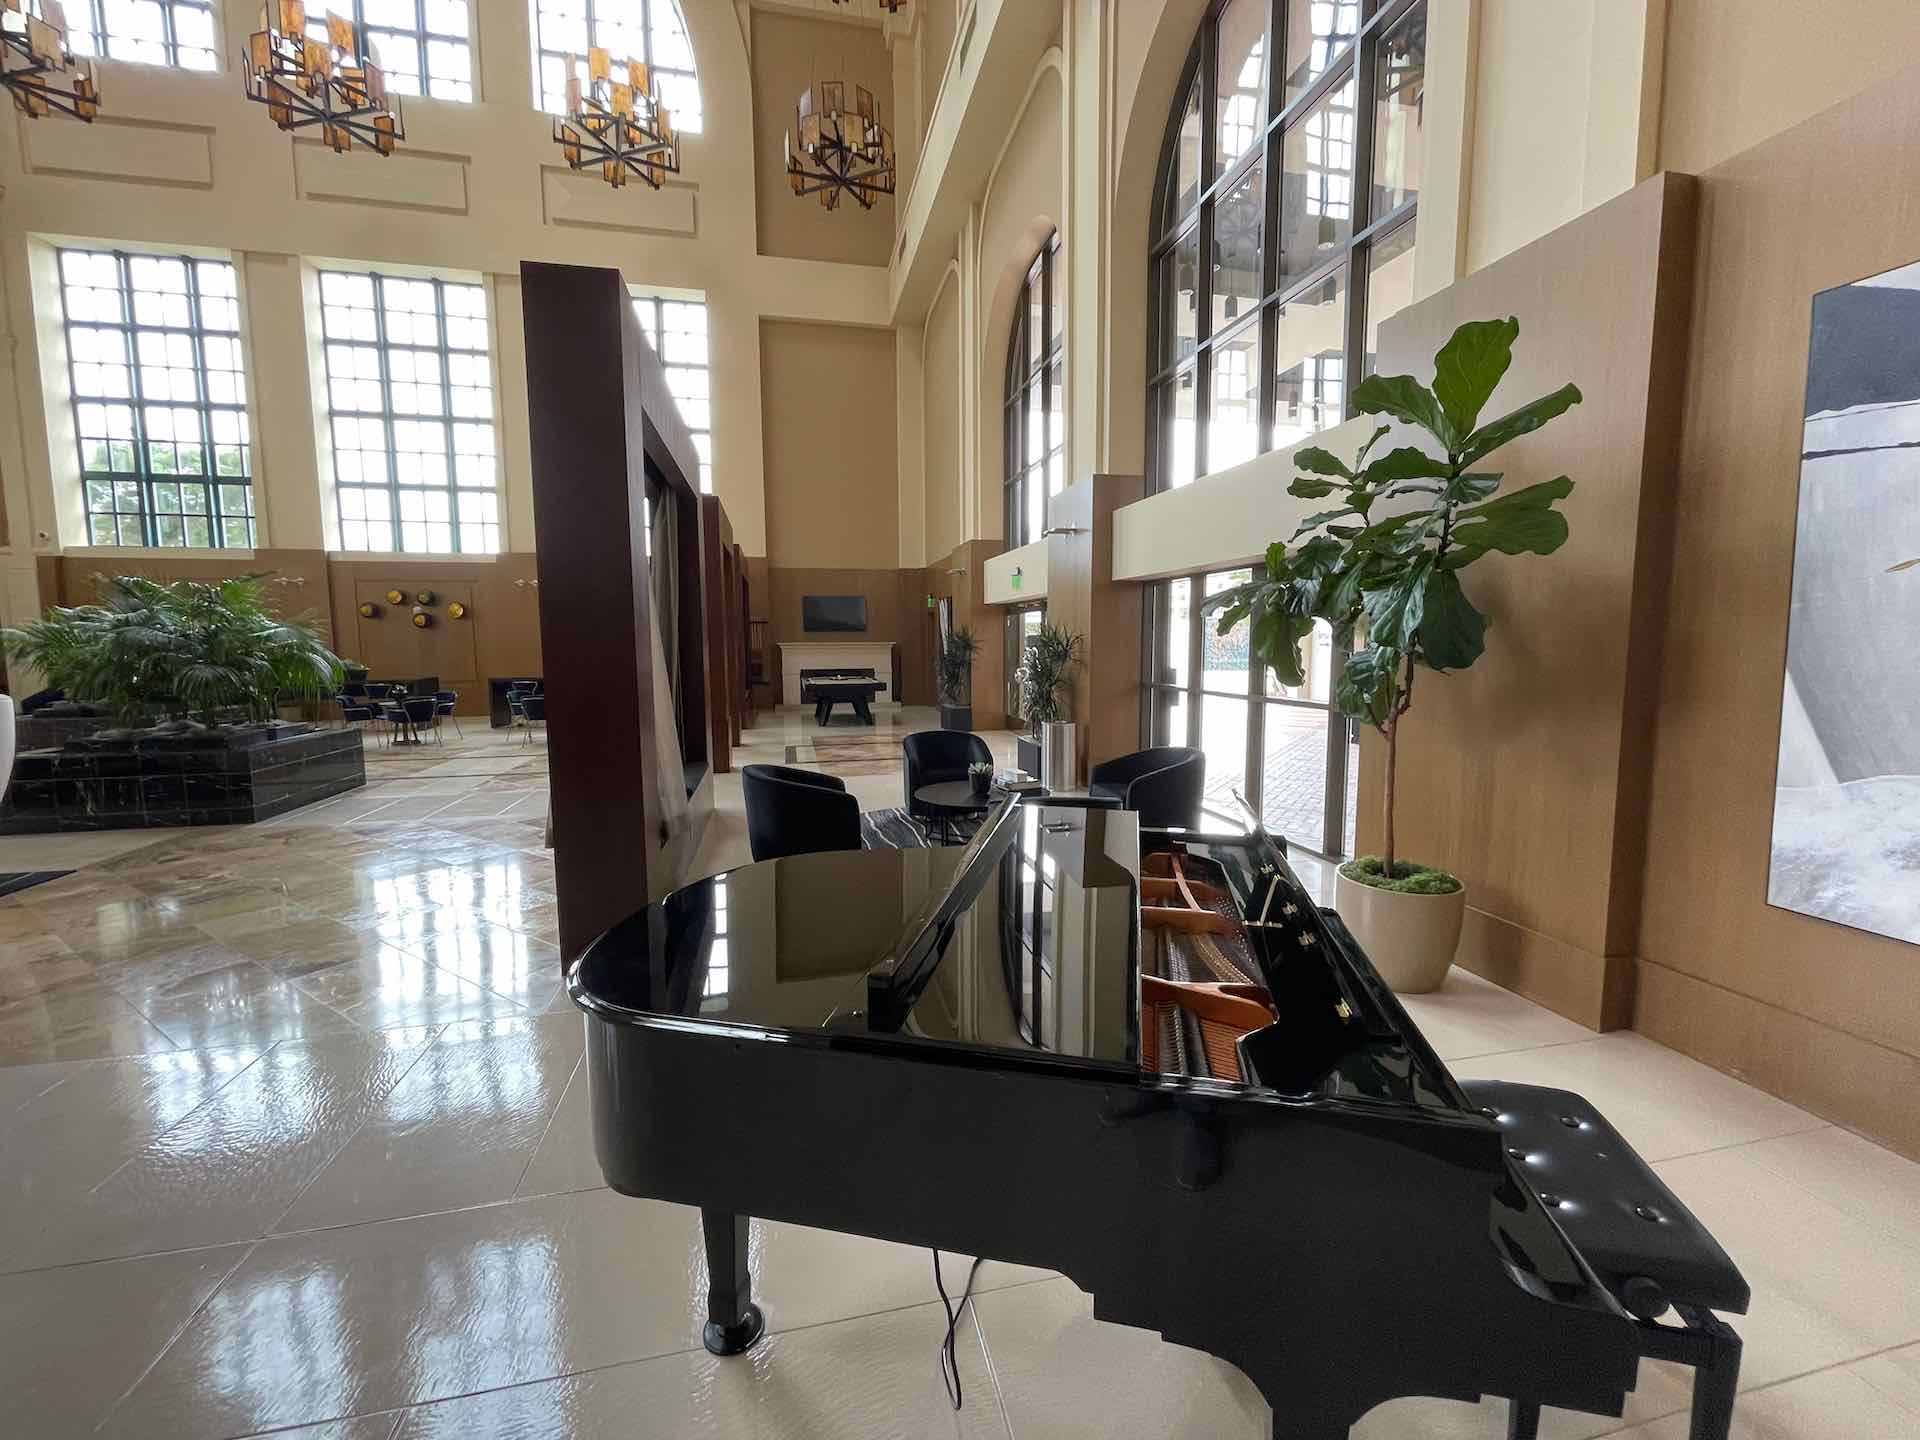 Piano located in community lounge